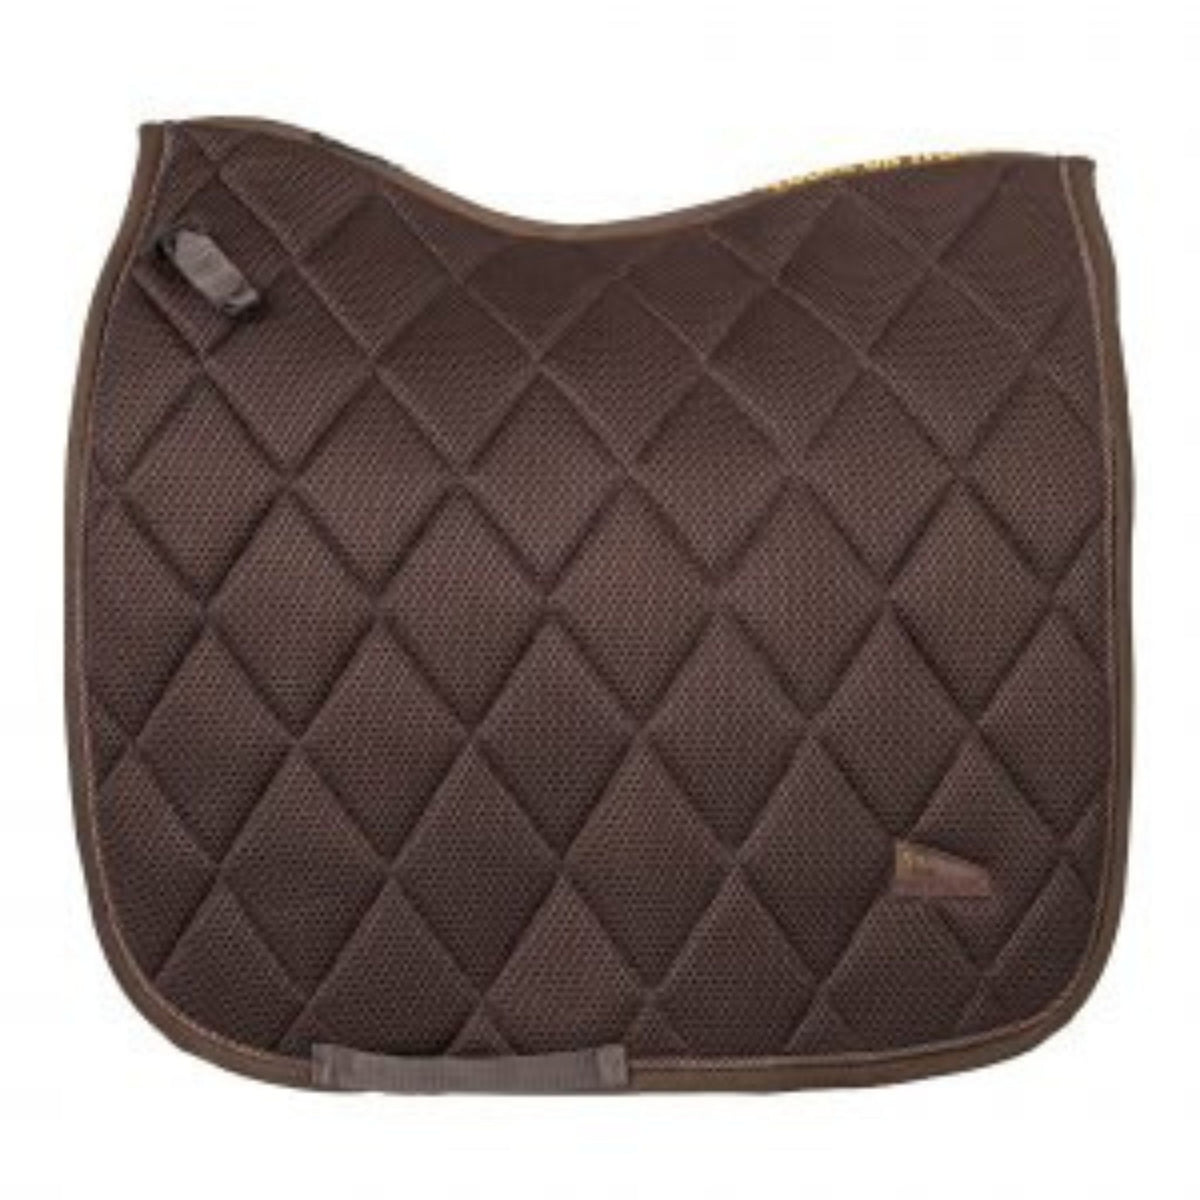 Dark Chocolate saddle pad with small withers saddle points 